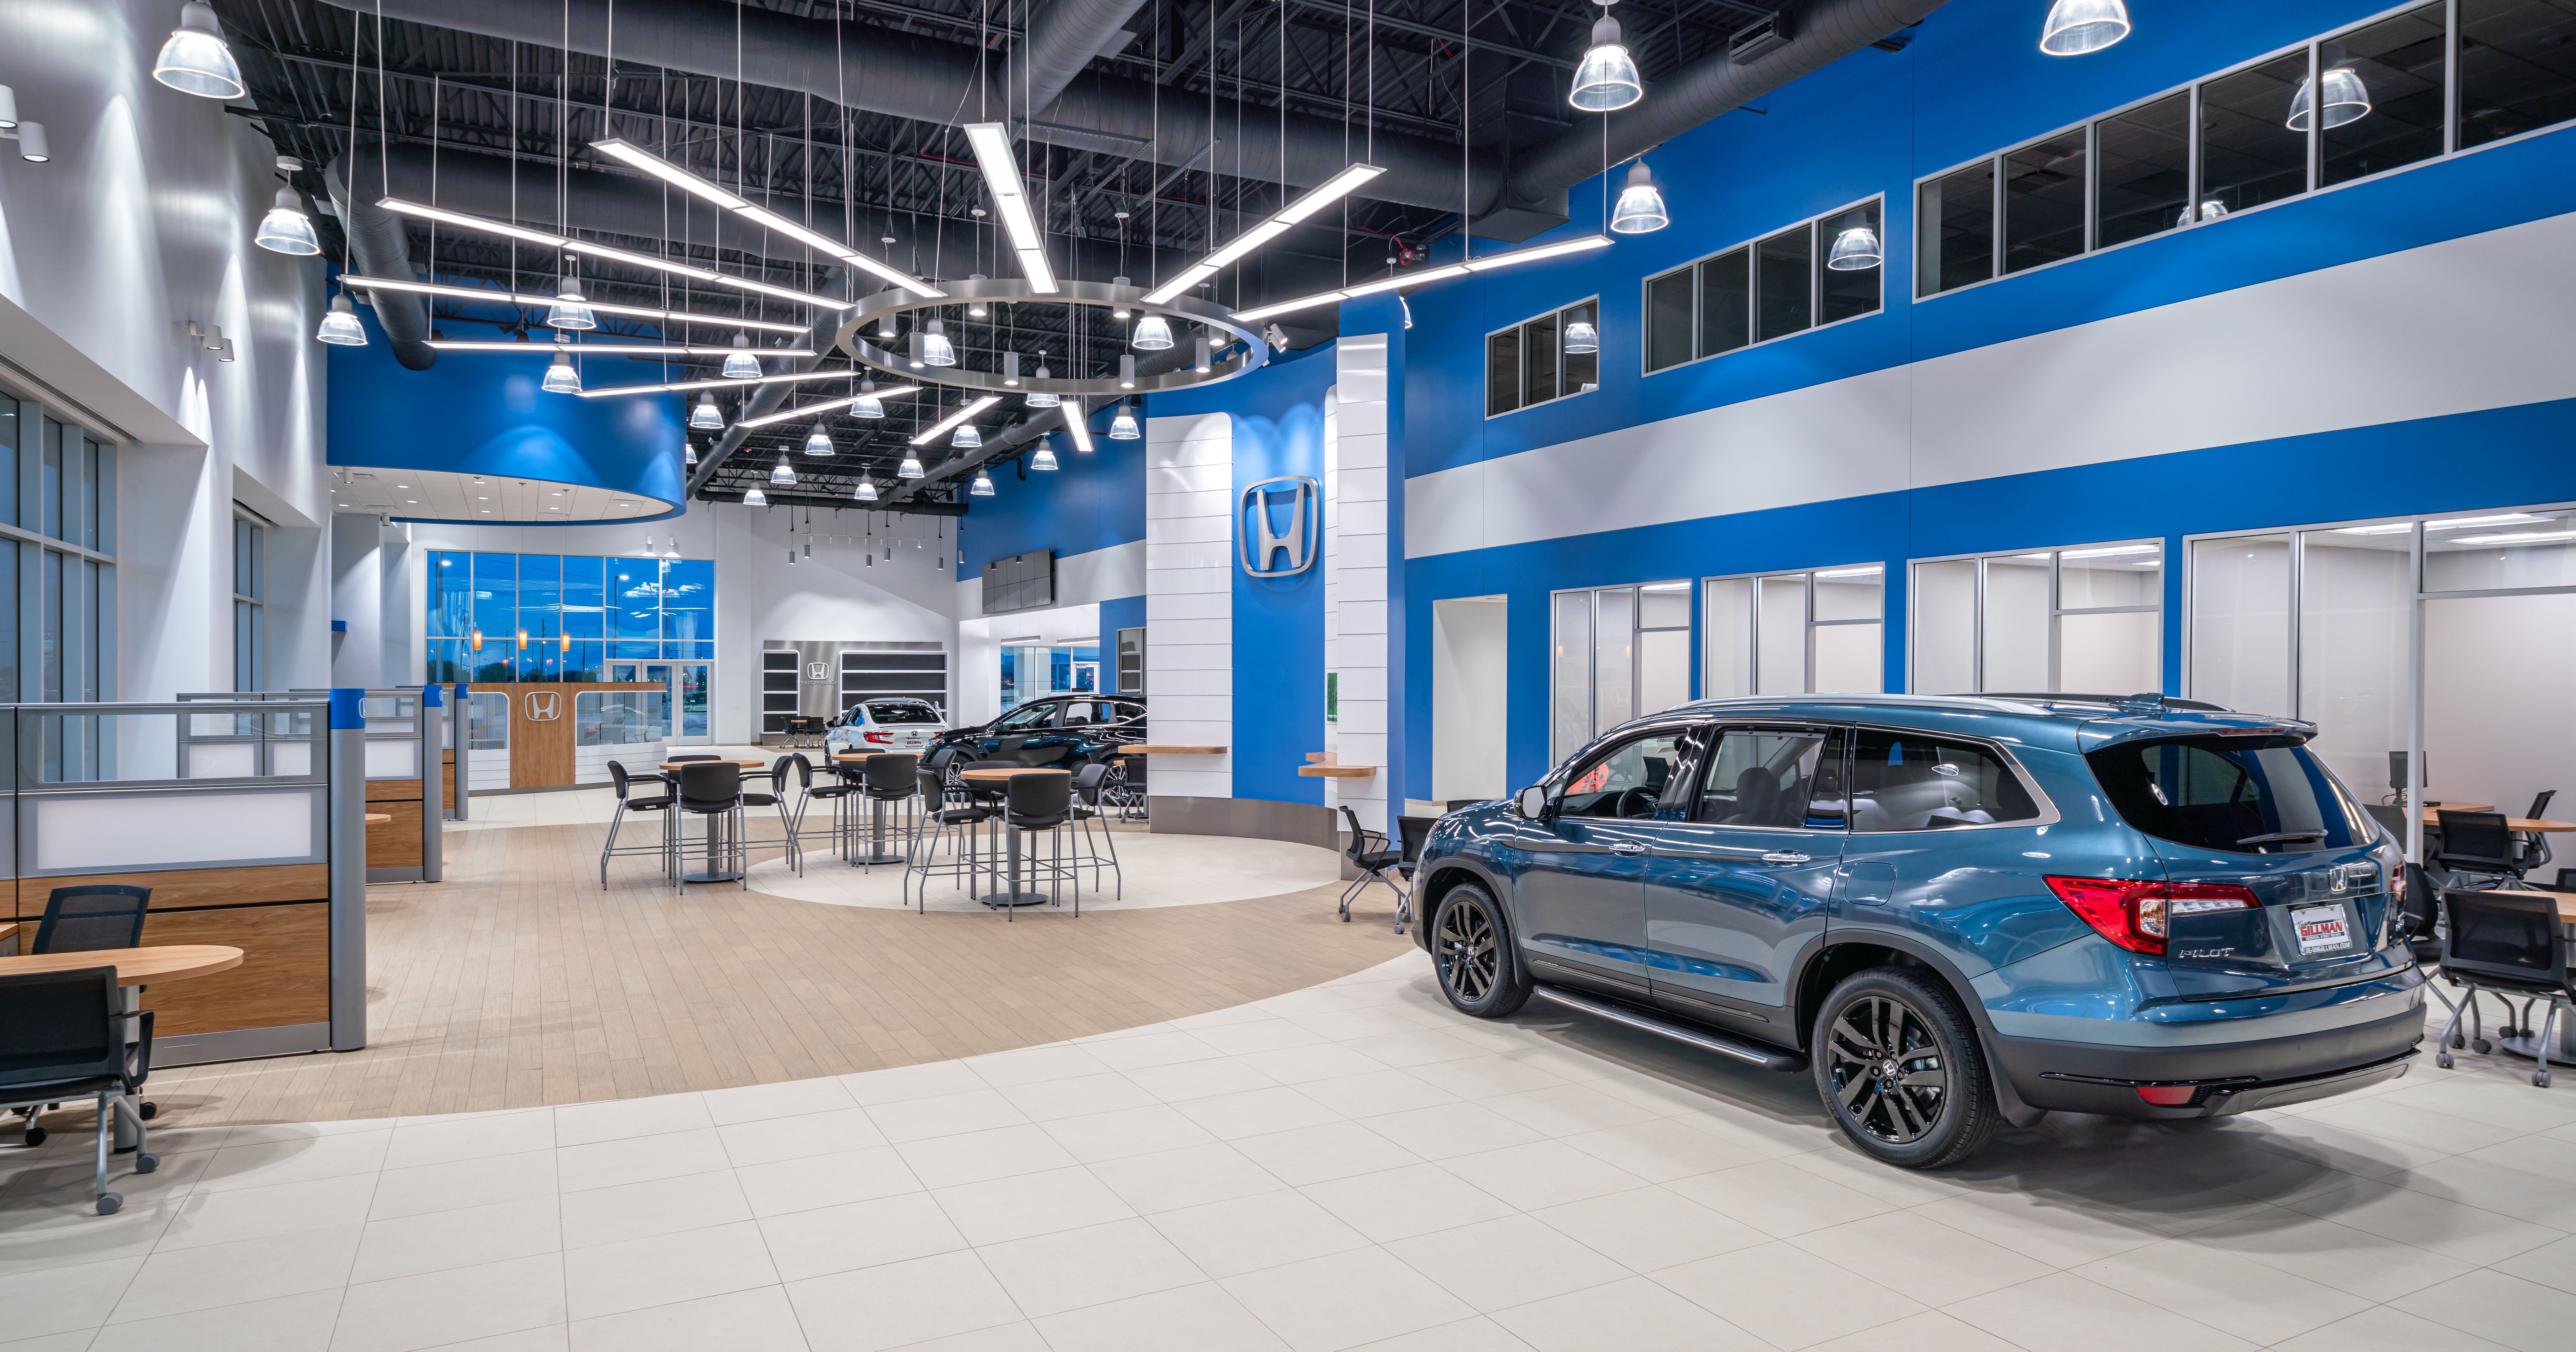 We are proud to be the #1 volume honda dealer in the usa, and we intend on keeping it that way by providing the best possible experience. New Dealership Showroom Dealership Showroom Van For Sale Honda Service